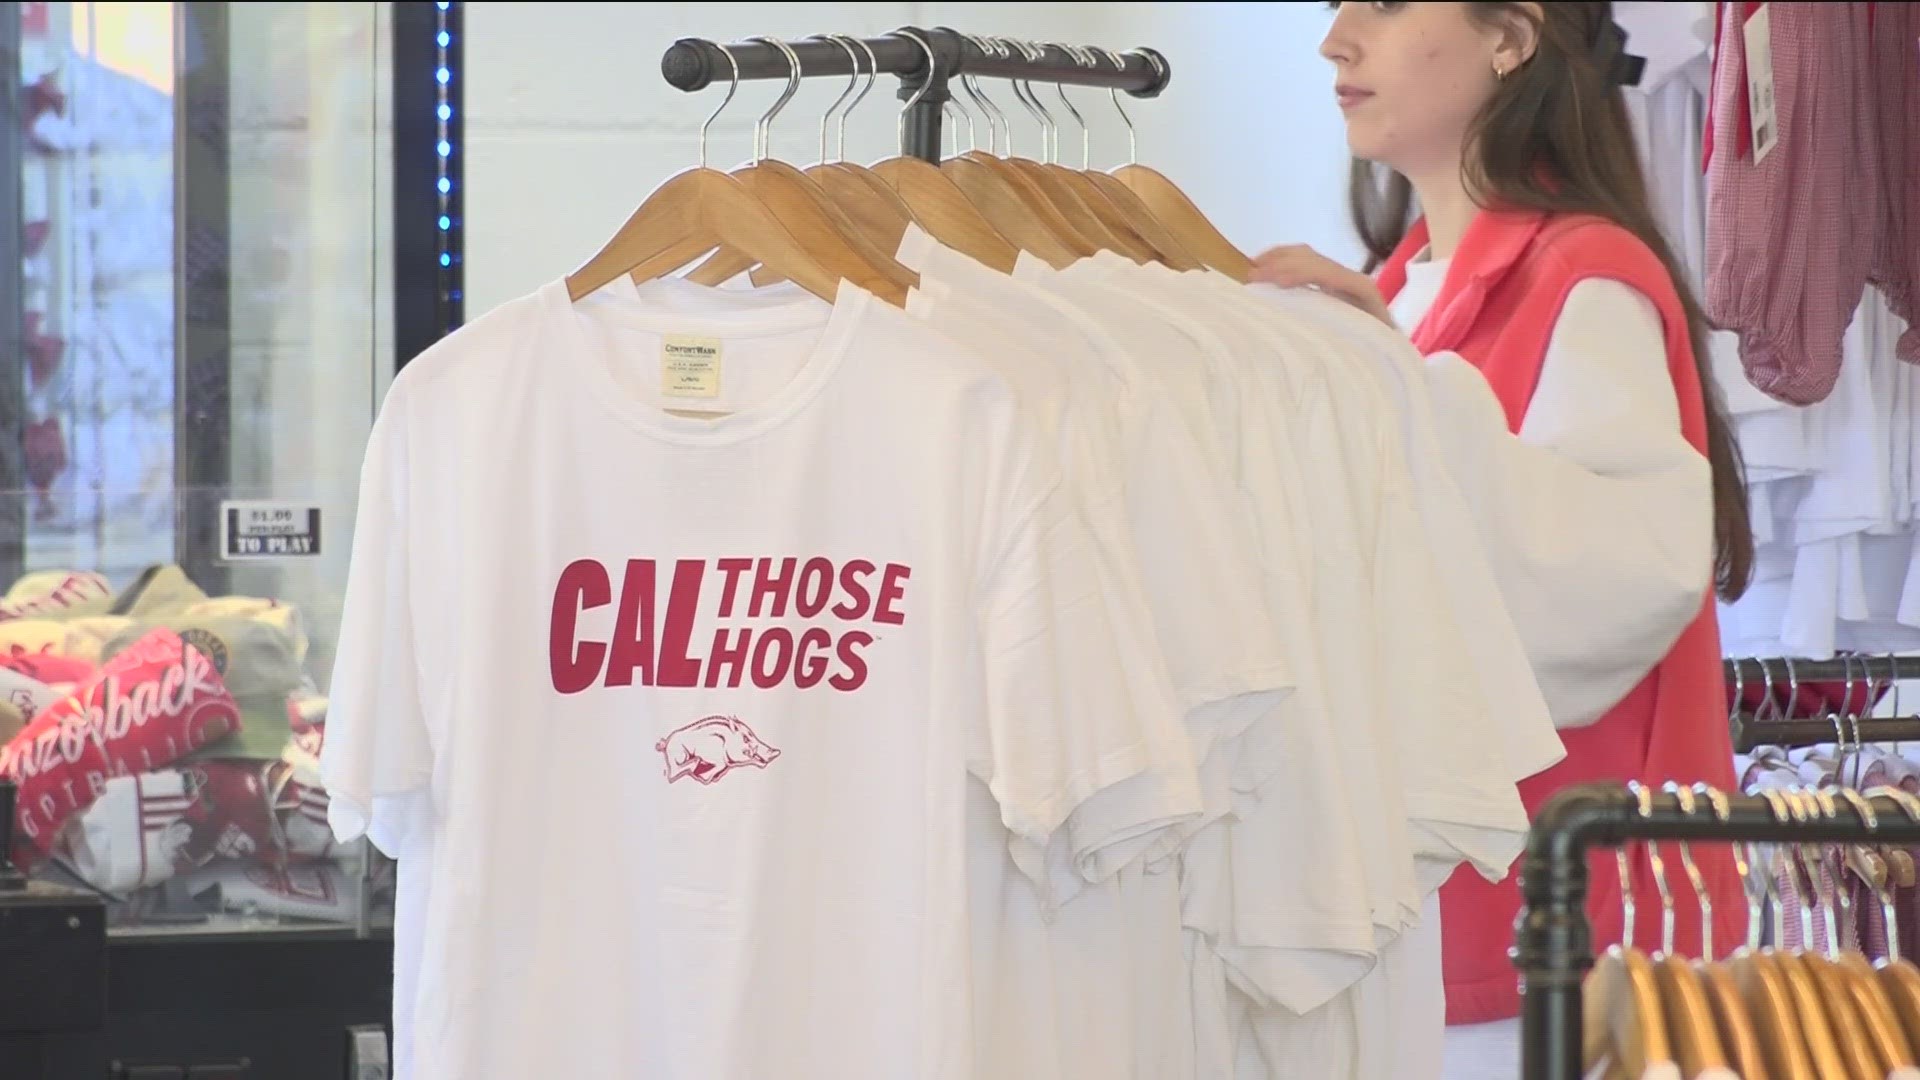 WITH THE NEW COACH NOW IN TOWN – COMES THE OPPORTUNITY FOR FANS TO BUY SOME NEW RAZORBACK MERCHANDISE...